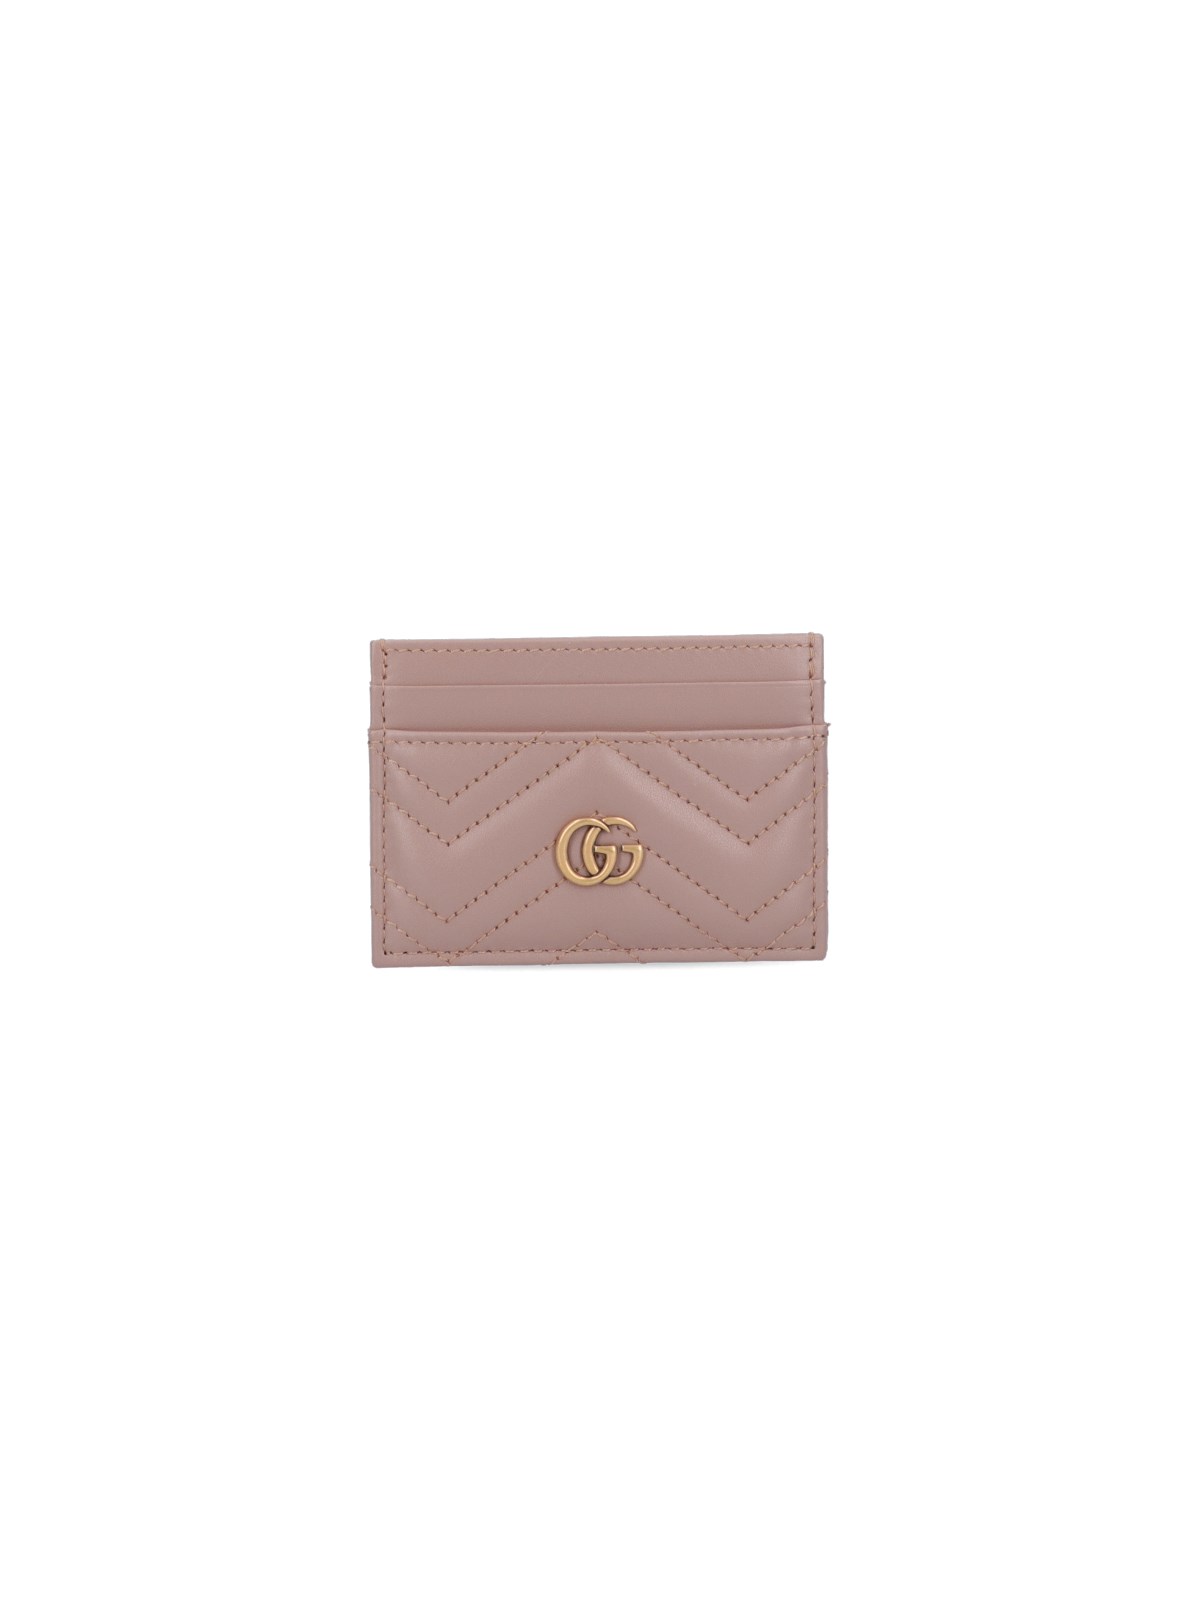 GUCCI 'GG MARMONT' CARD HOLDER